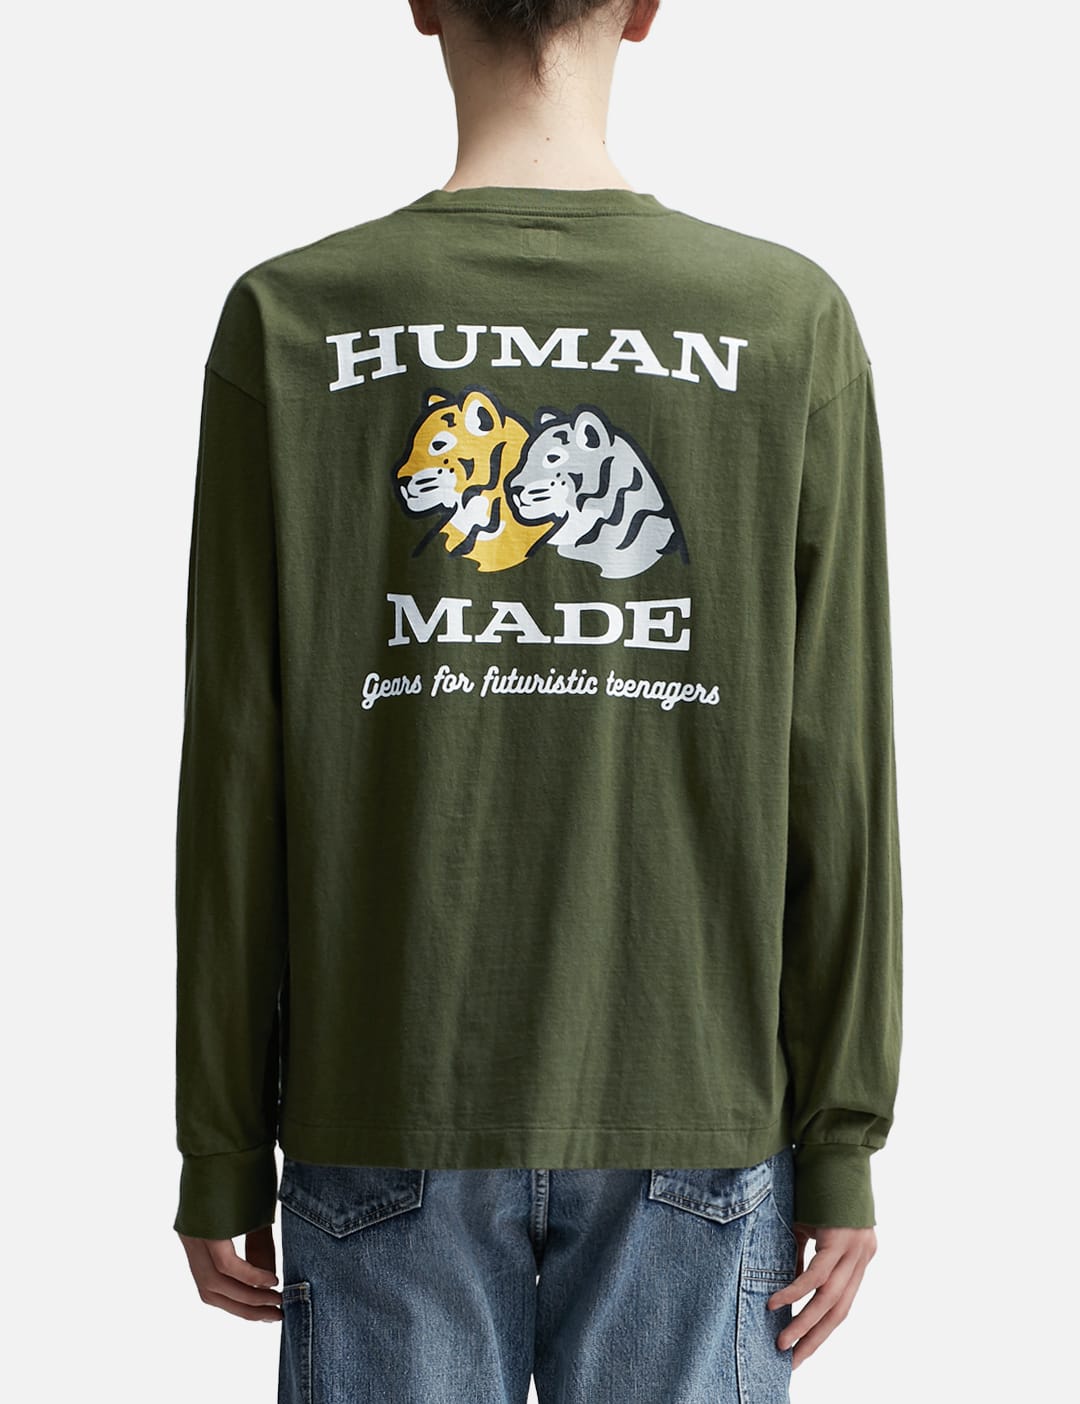 Human Made - GRAPHIC L/S T-SHIRT #1 | HBX - Globally Curated